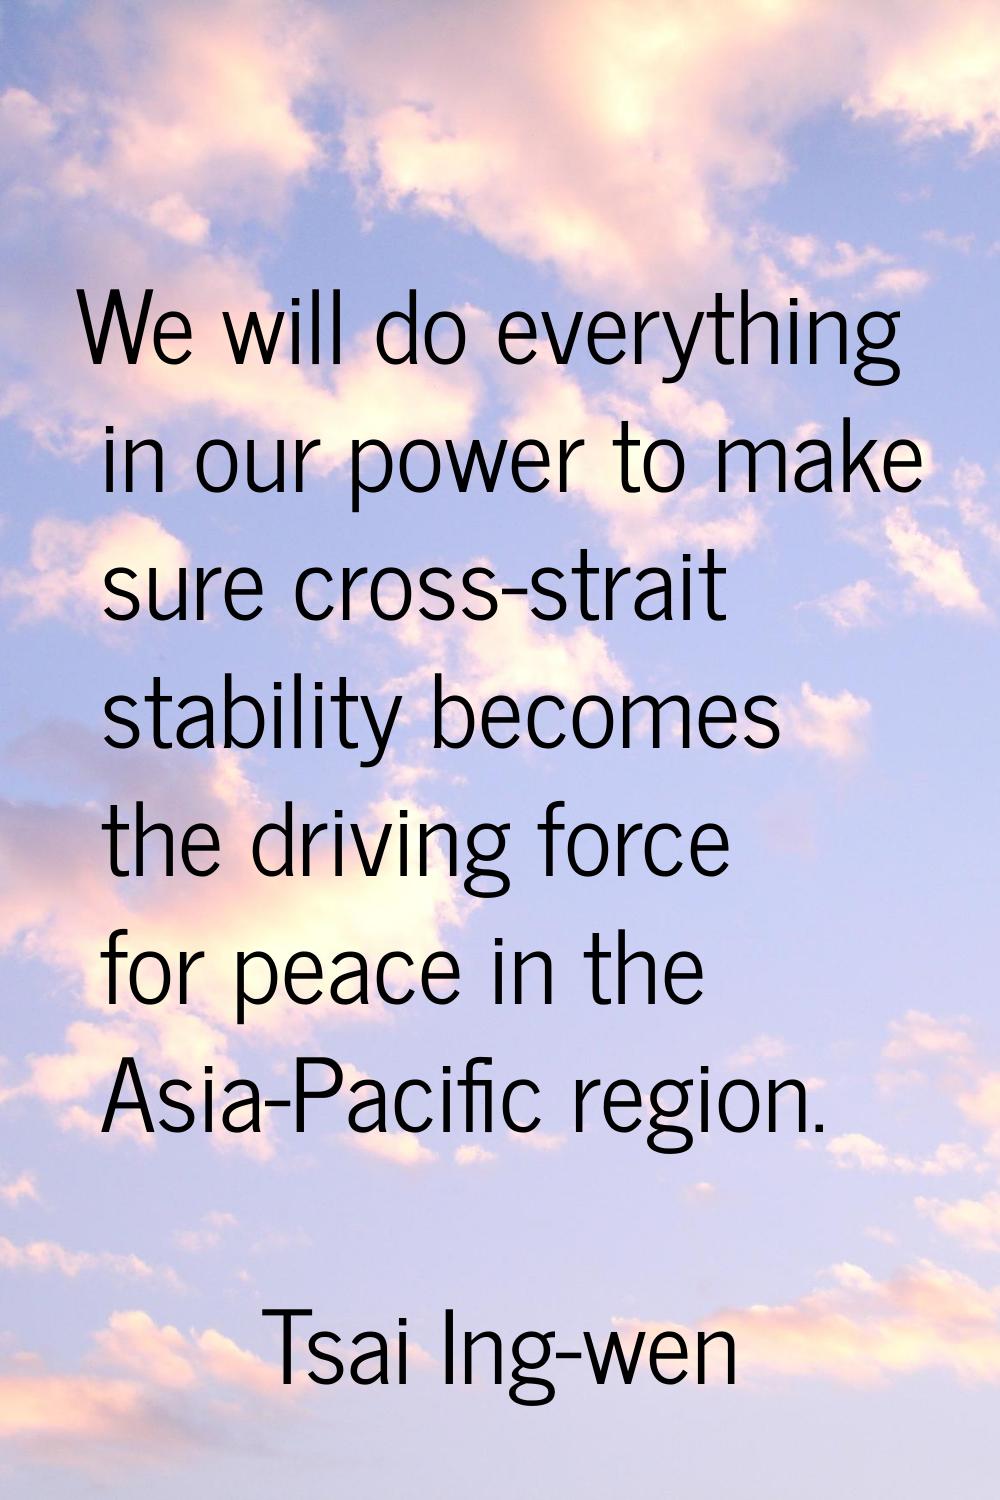 We will do everything in our power to make sure cross-strait stability becomes the driving force fo